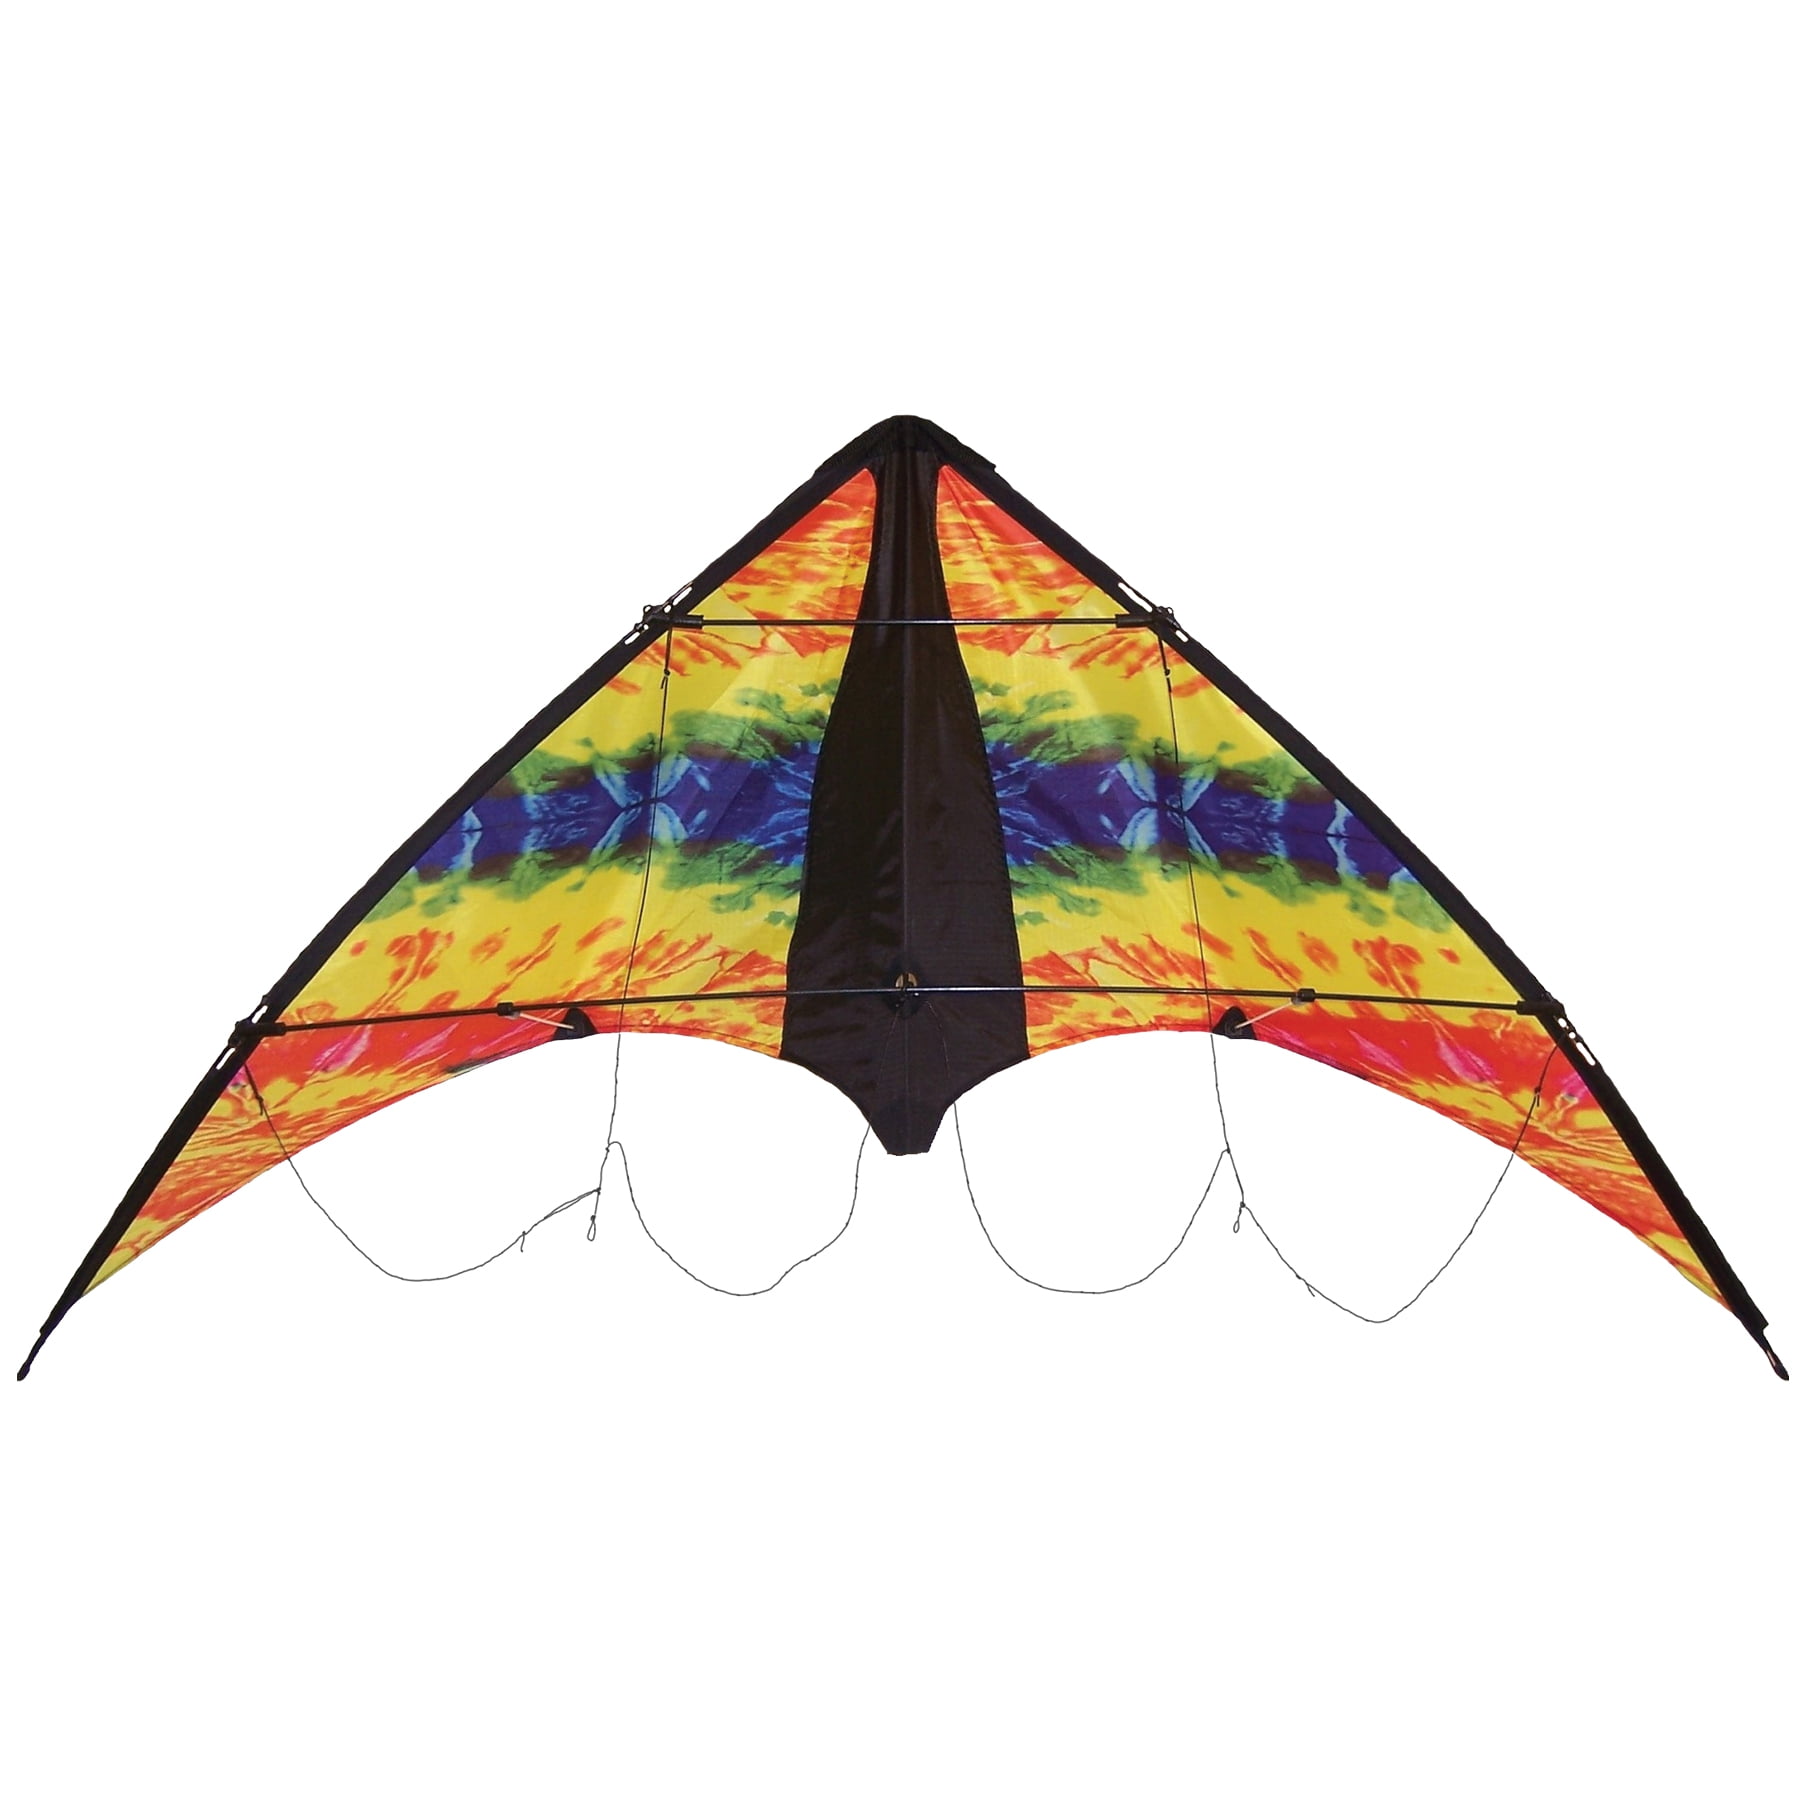 In the Breeze 3309 — Groovy Stunter Stunt Kite - 2-Line Sport Kite -  Includes Kite Line and Bag